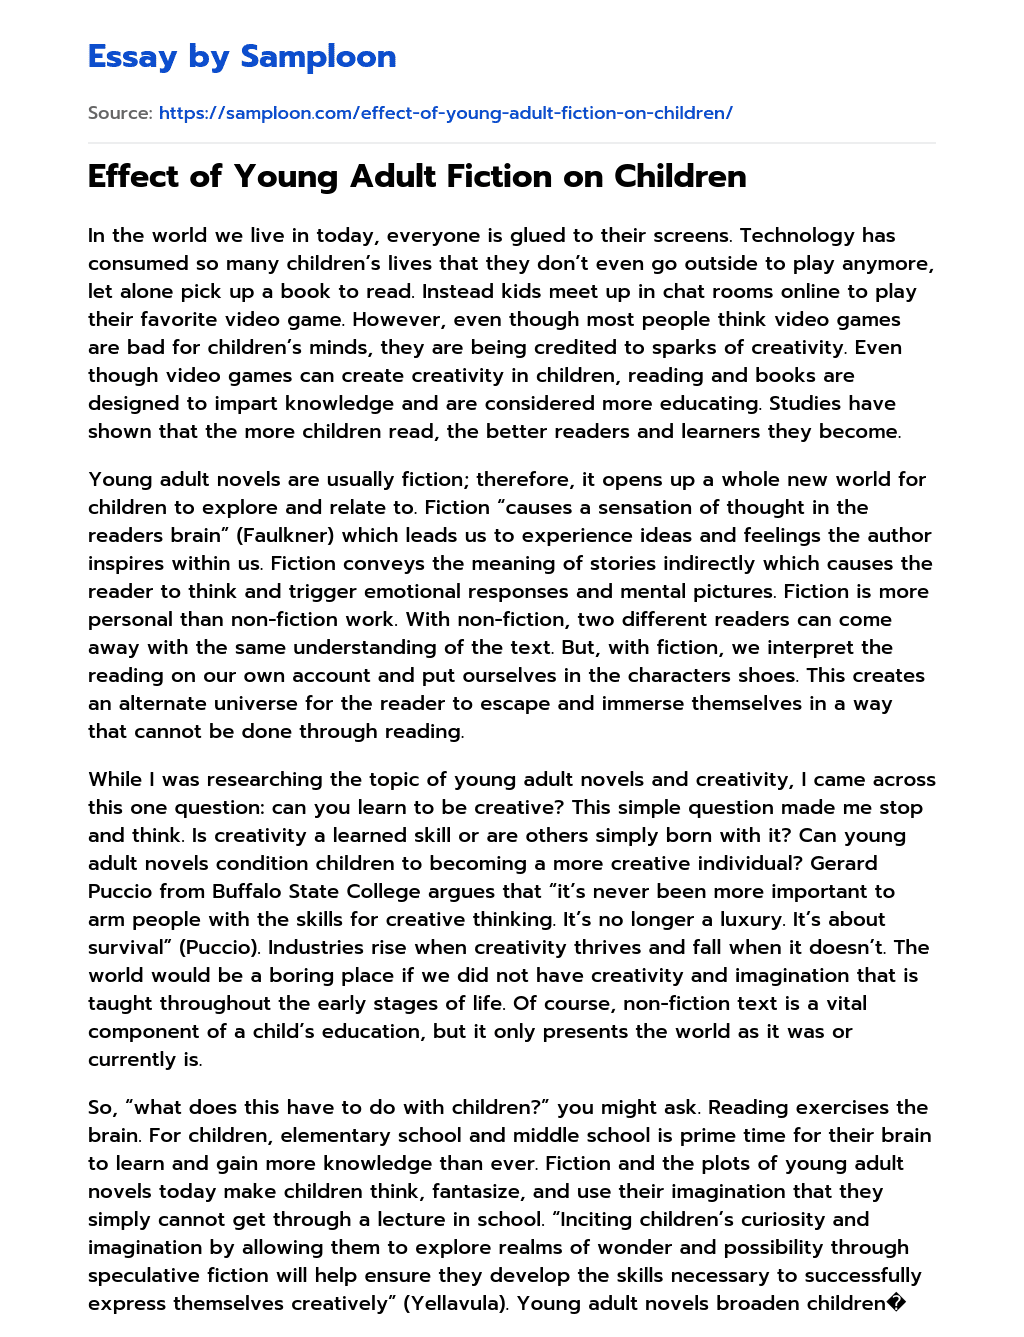 Effect of Young Adult Fiction on Children essay